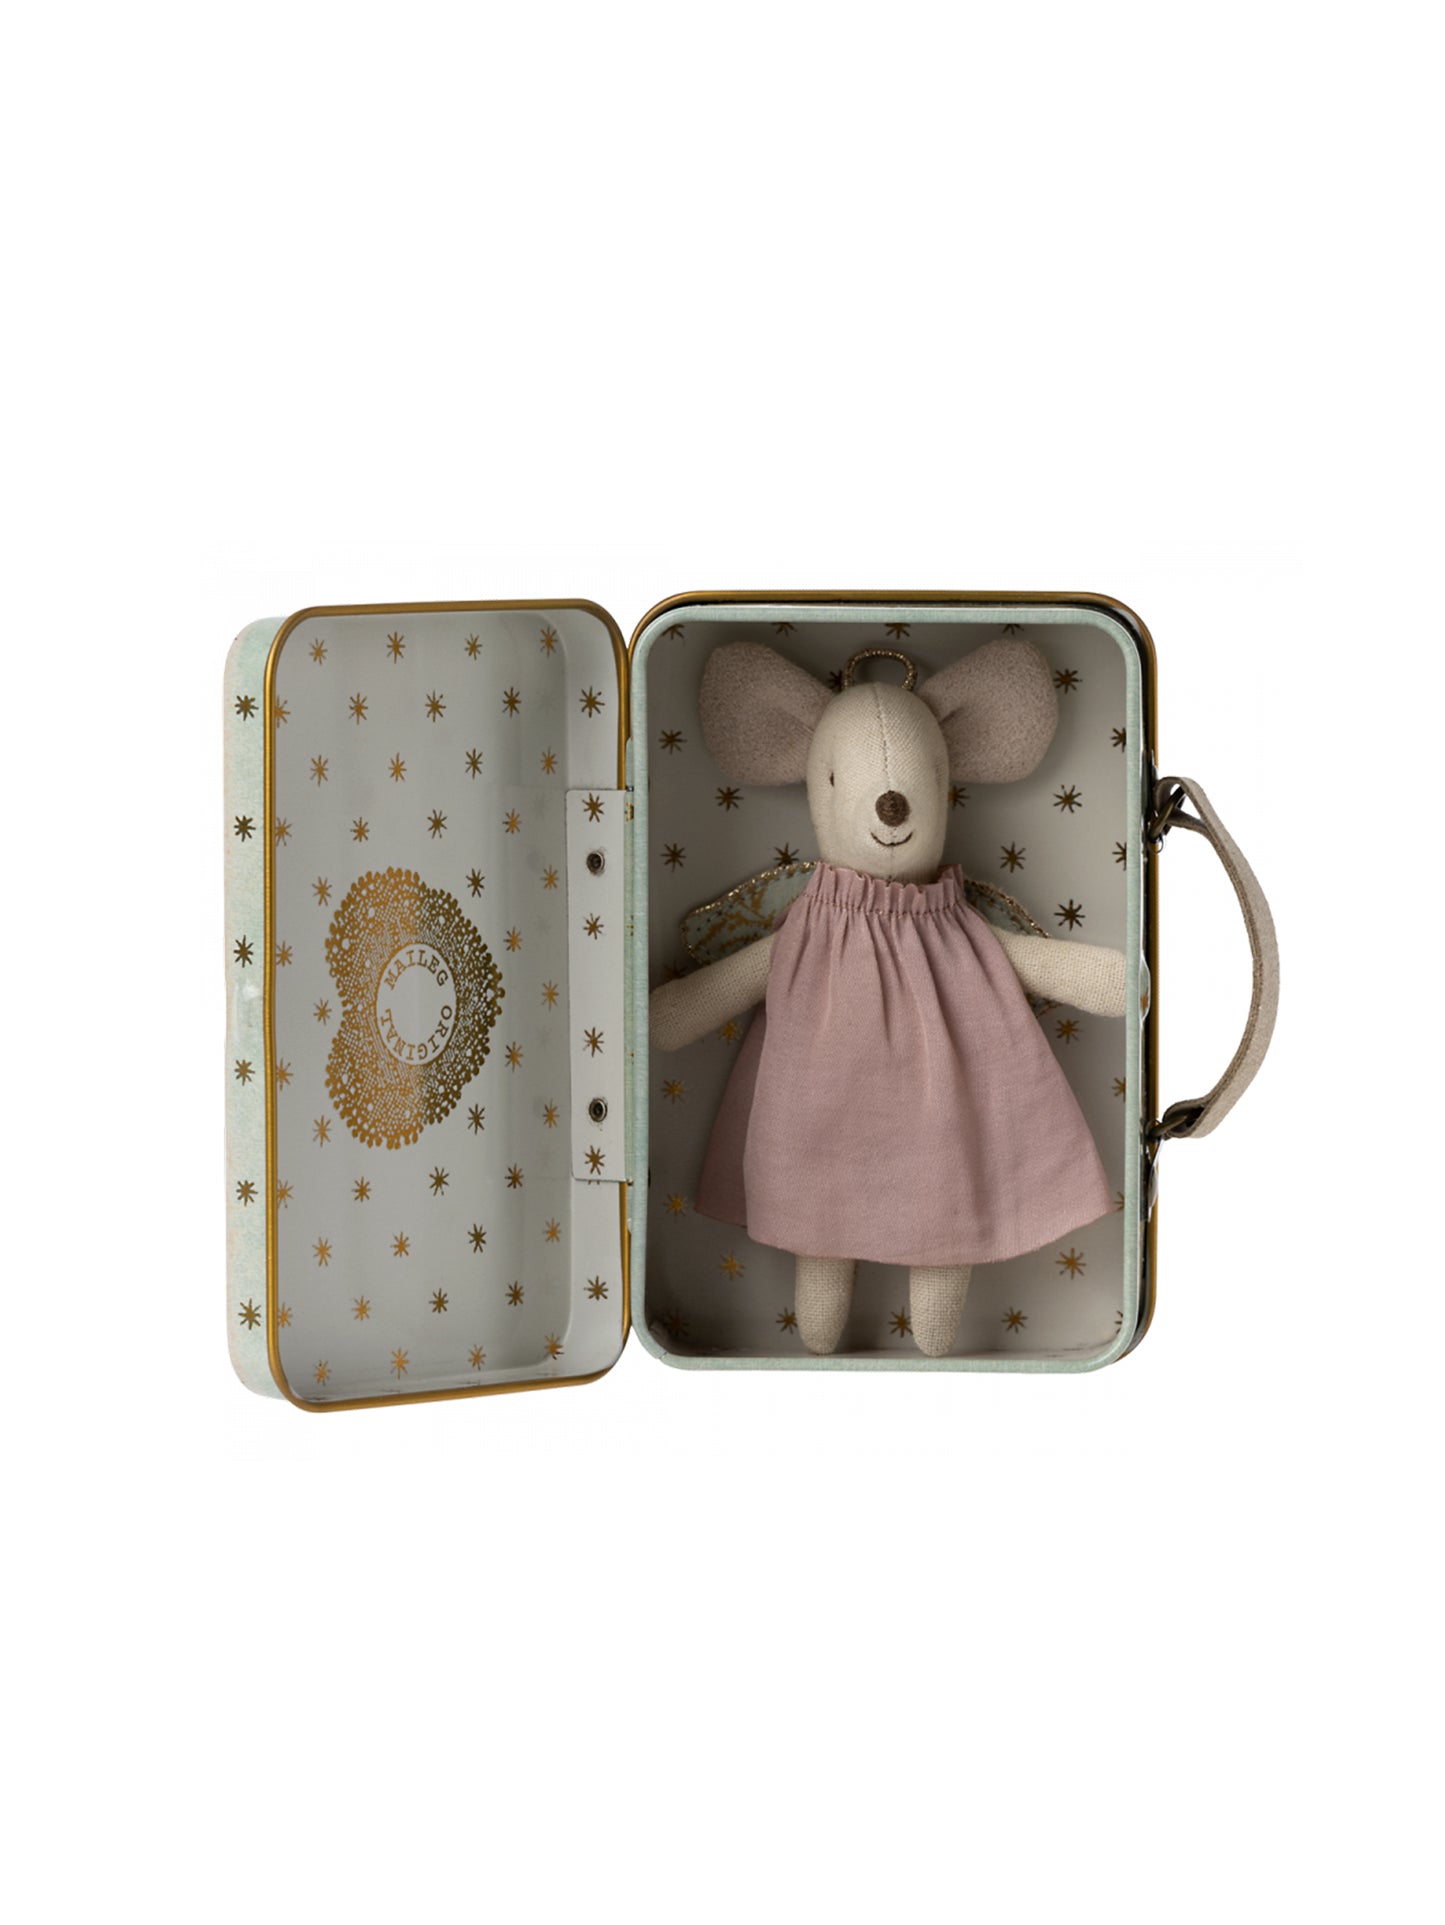 Maileg Angel Mouse in Suitcase Weston Table